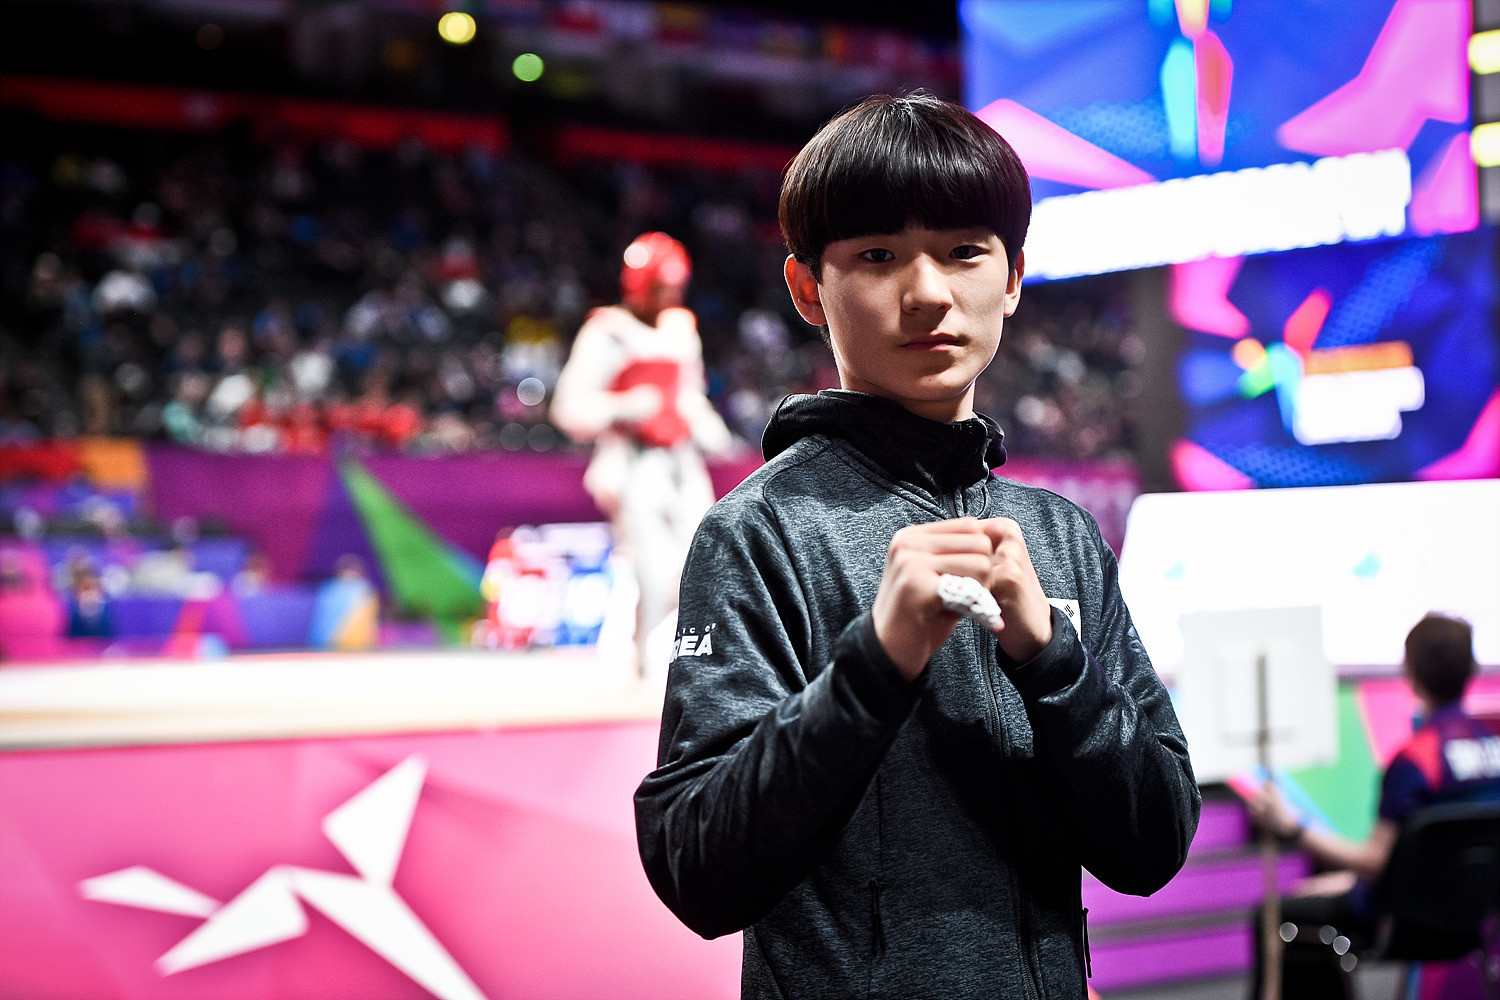 Bae Jun-seo is aiming to make his Olympic debut at Paris 2024 after being crowned as a world champion ©World Taekwondo